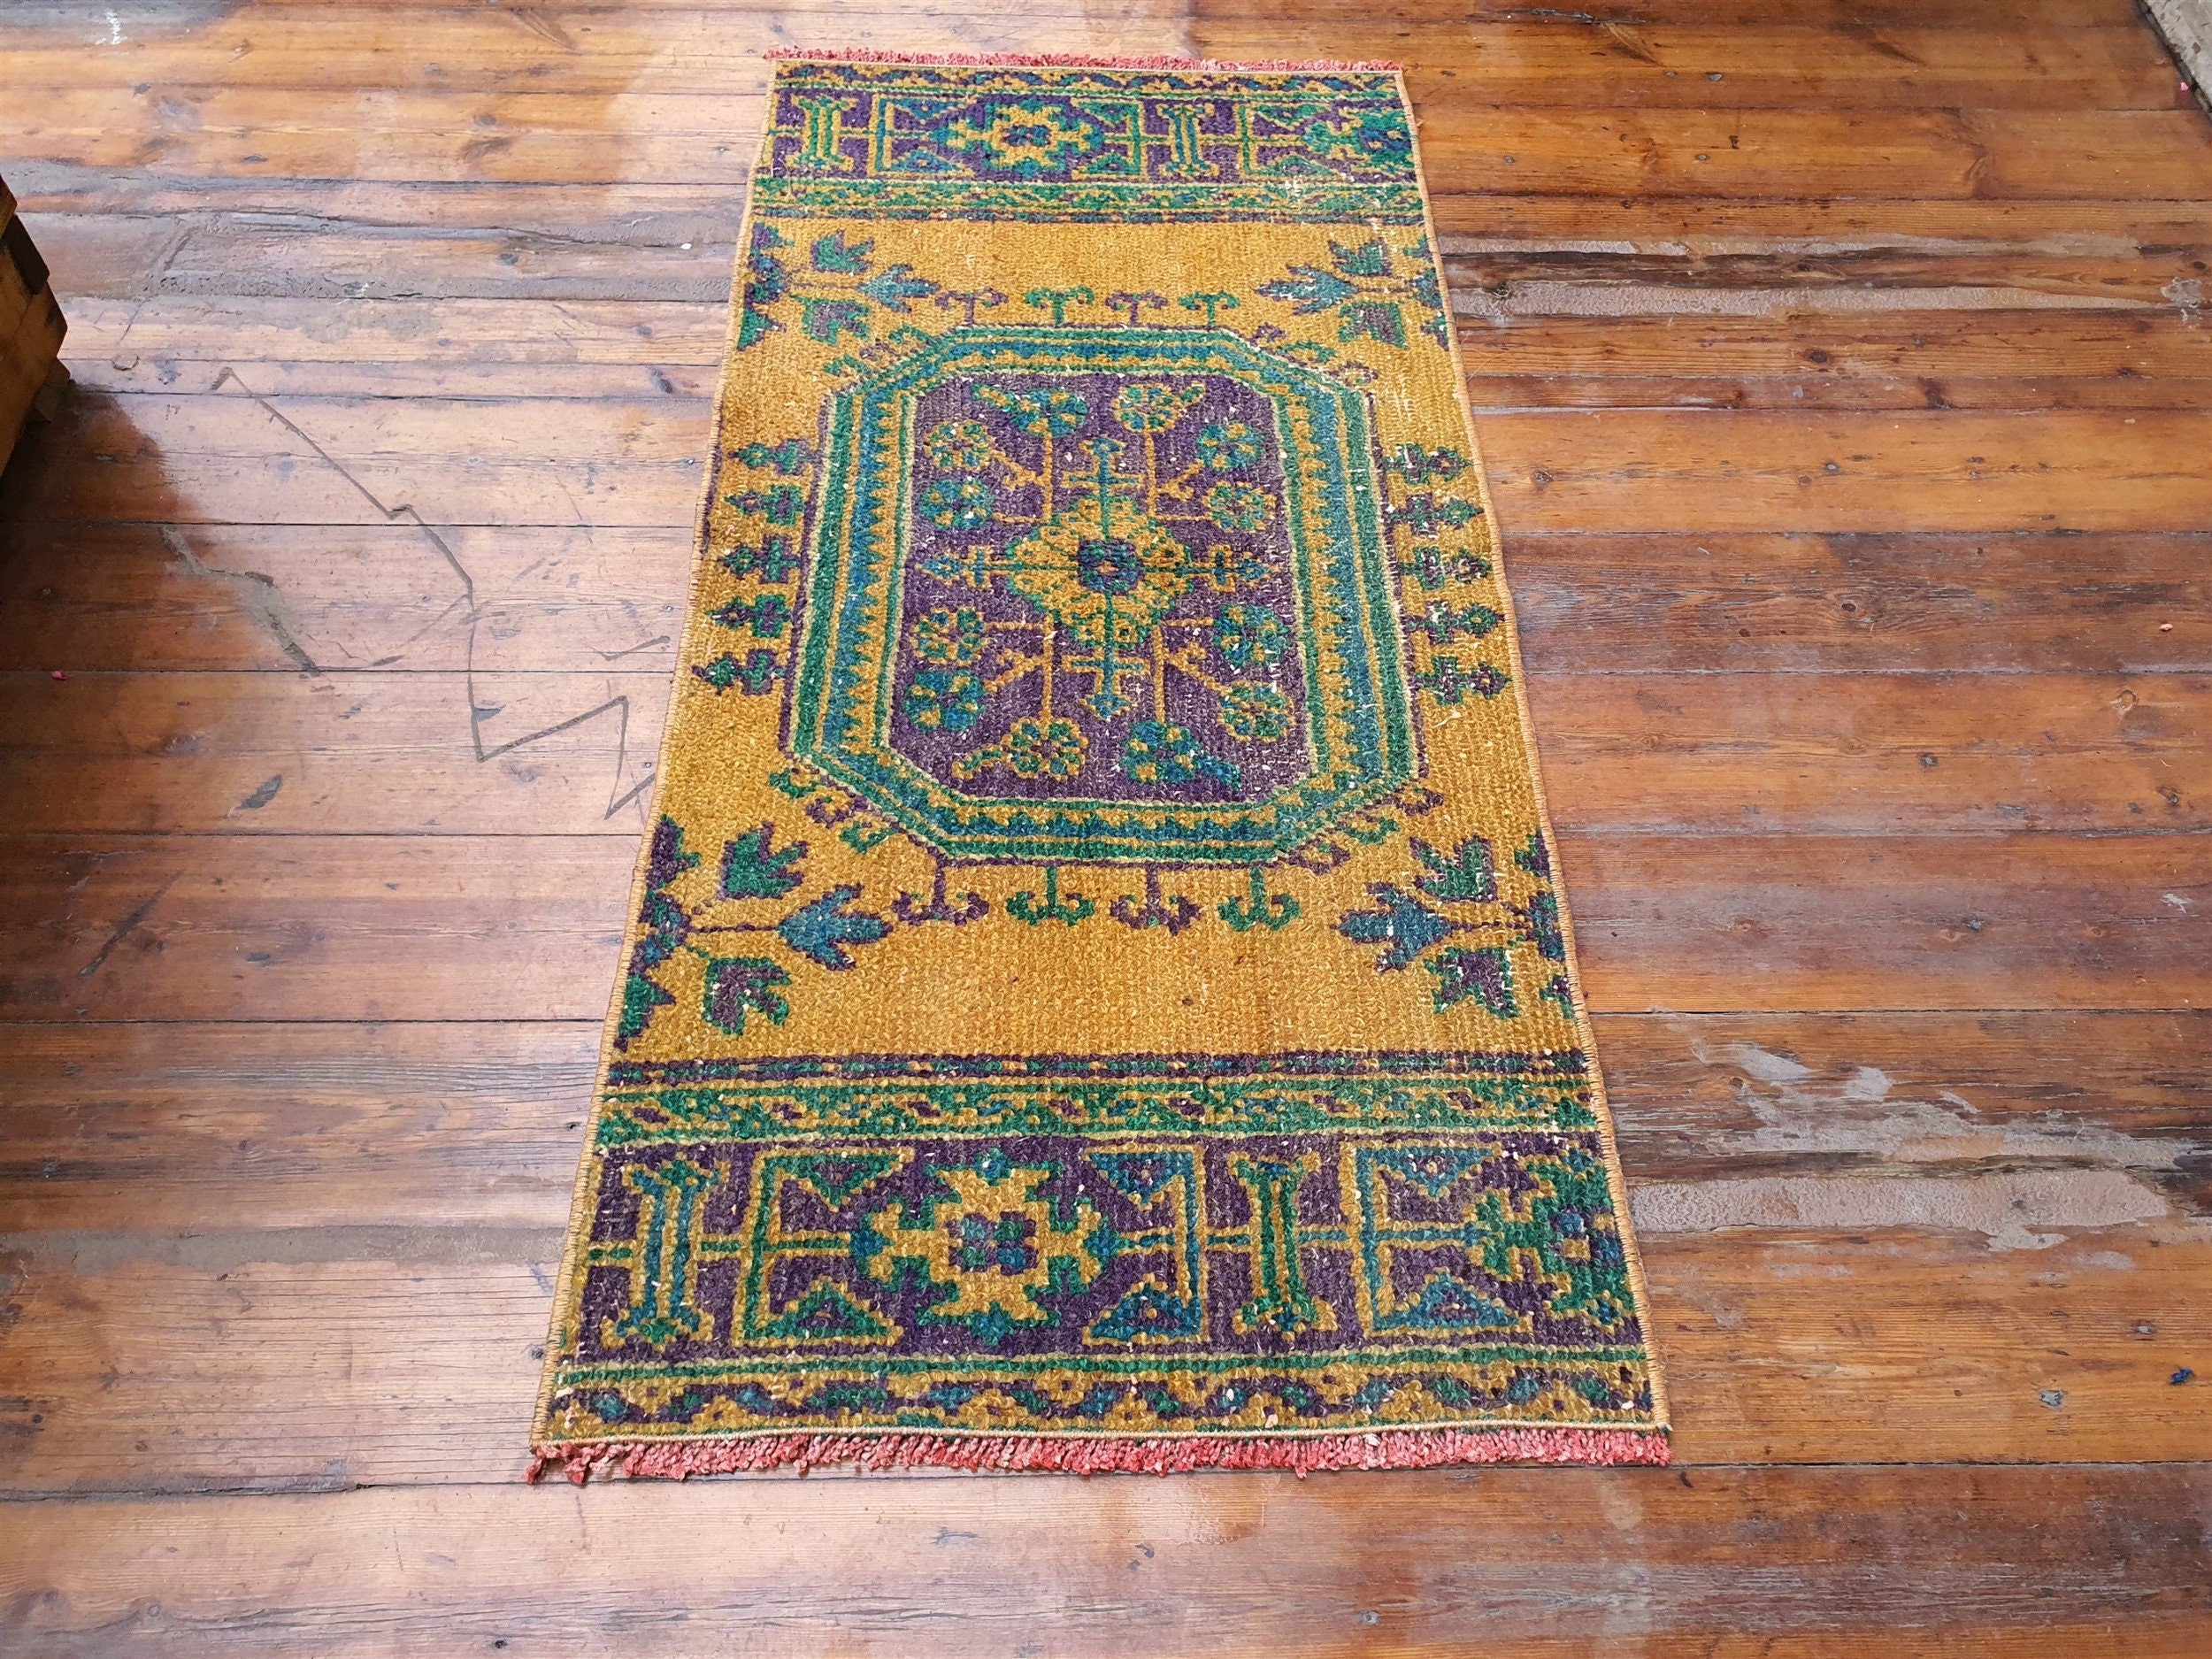 Small Turkish Rug, 4 ft 4 in x 2 ft, Apricot Orange and Teal Green Vintage Faded Distressed Door Mat